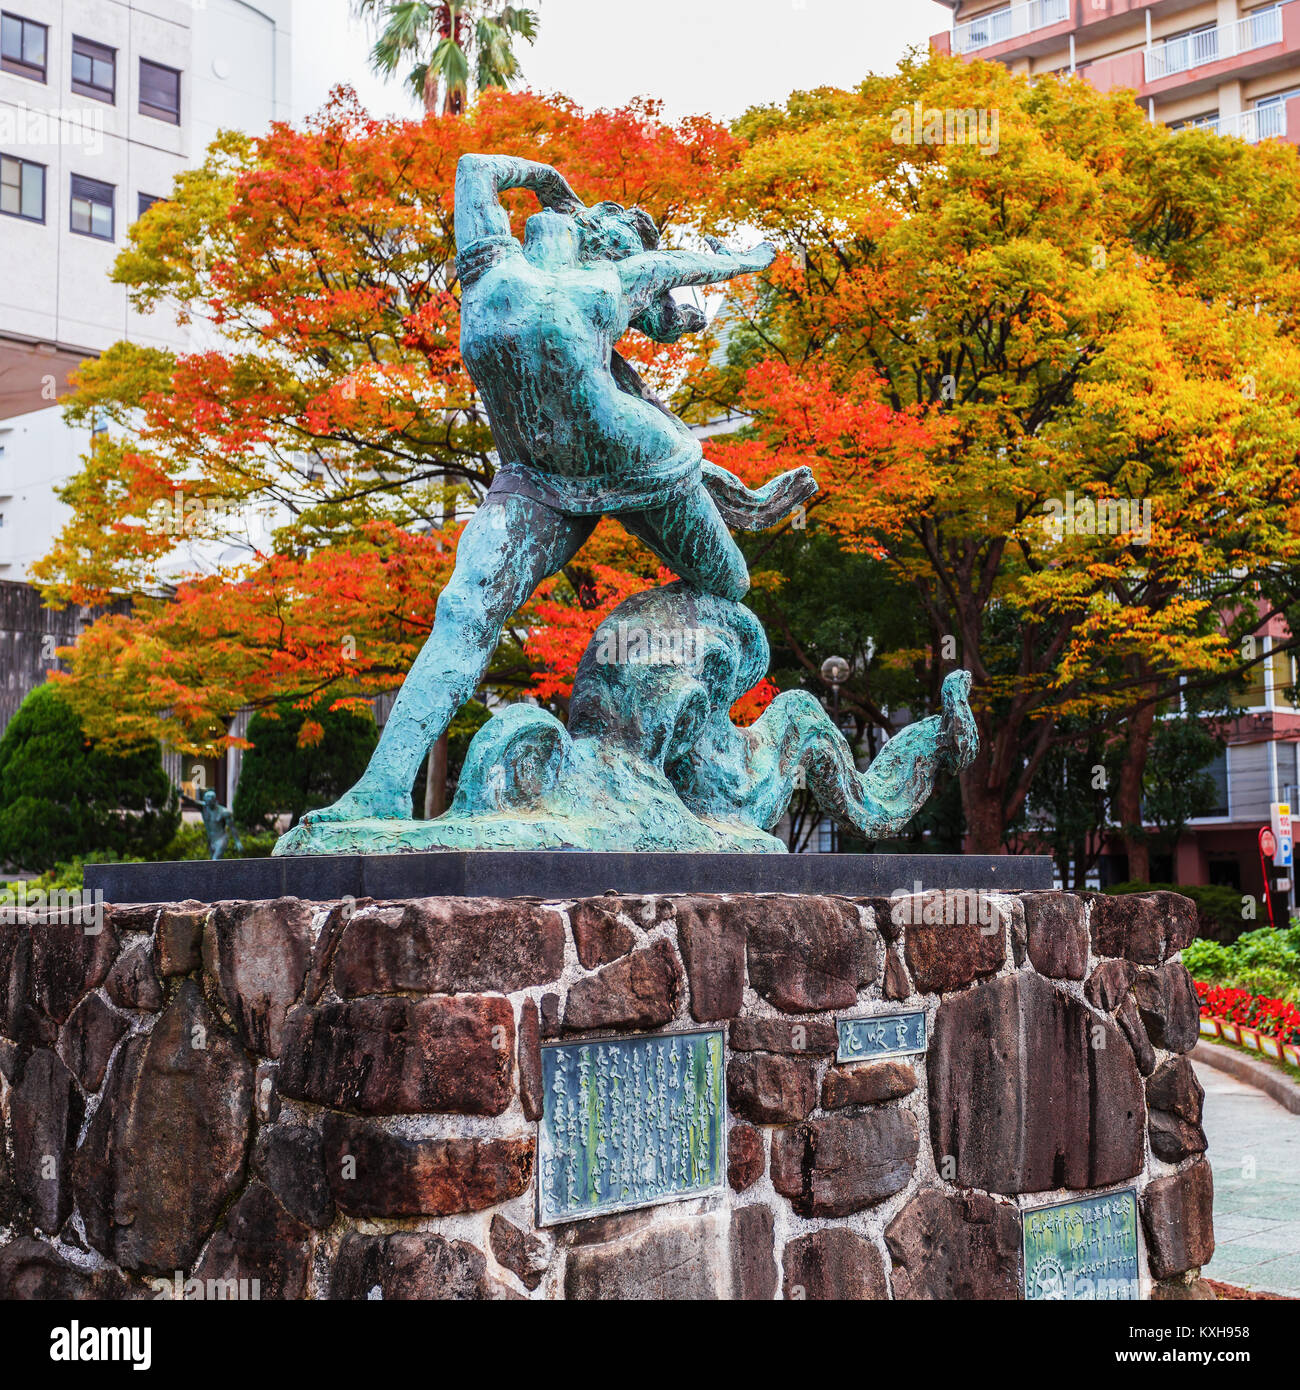 Nagasaki, Japan - November 14 2013: Girl and Octopus sculpture created in 1965, situated infront of Nagasaki Civic Center building which is in the are Stock Photo